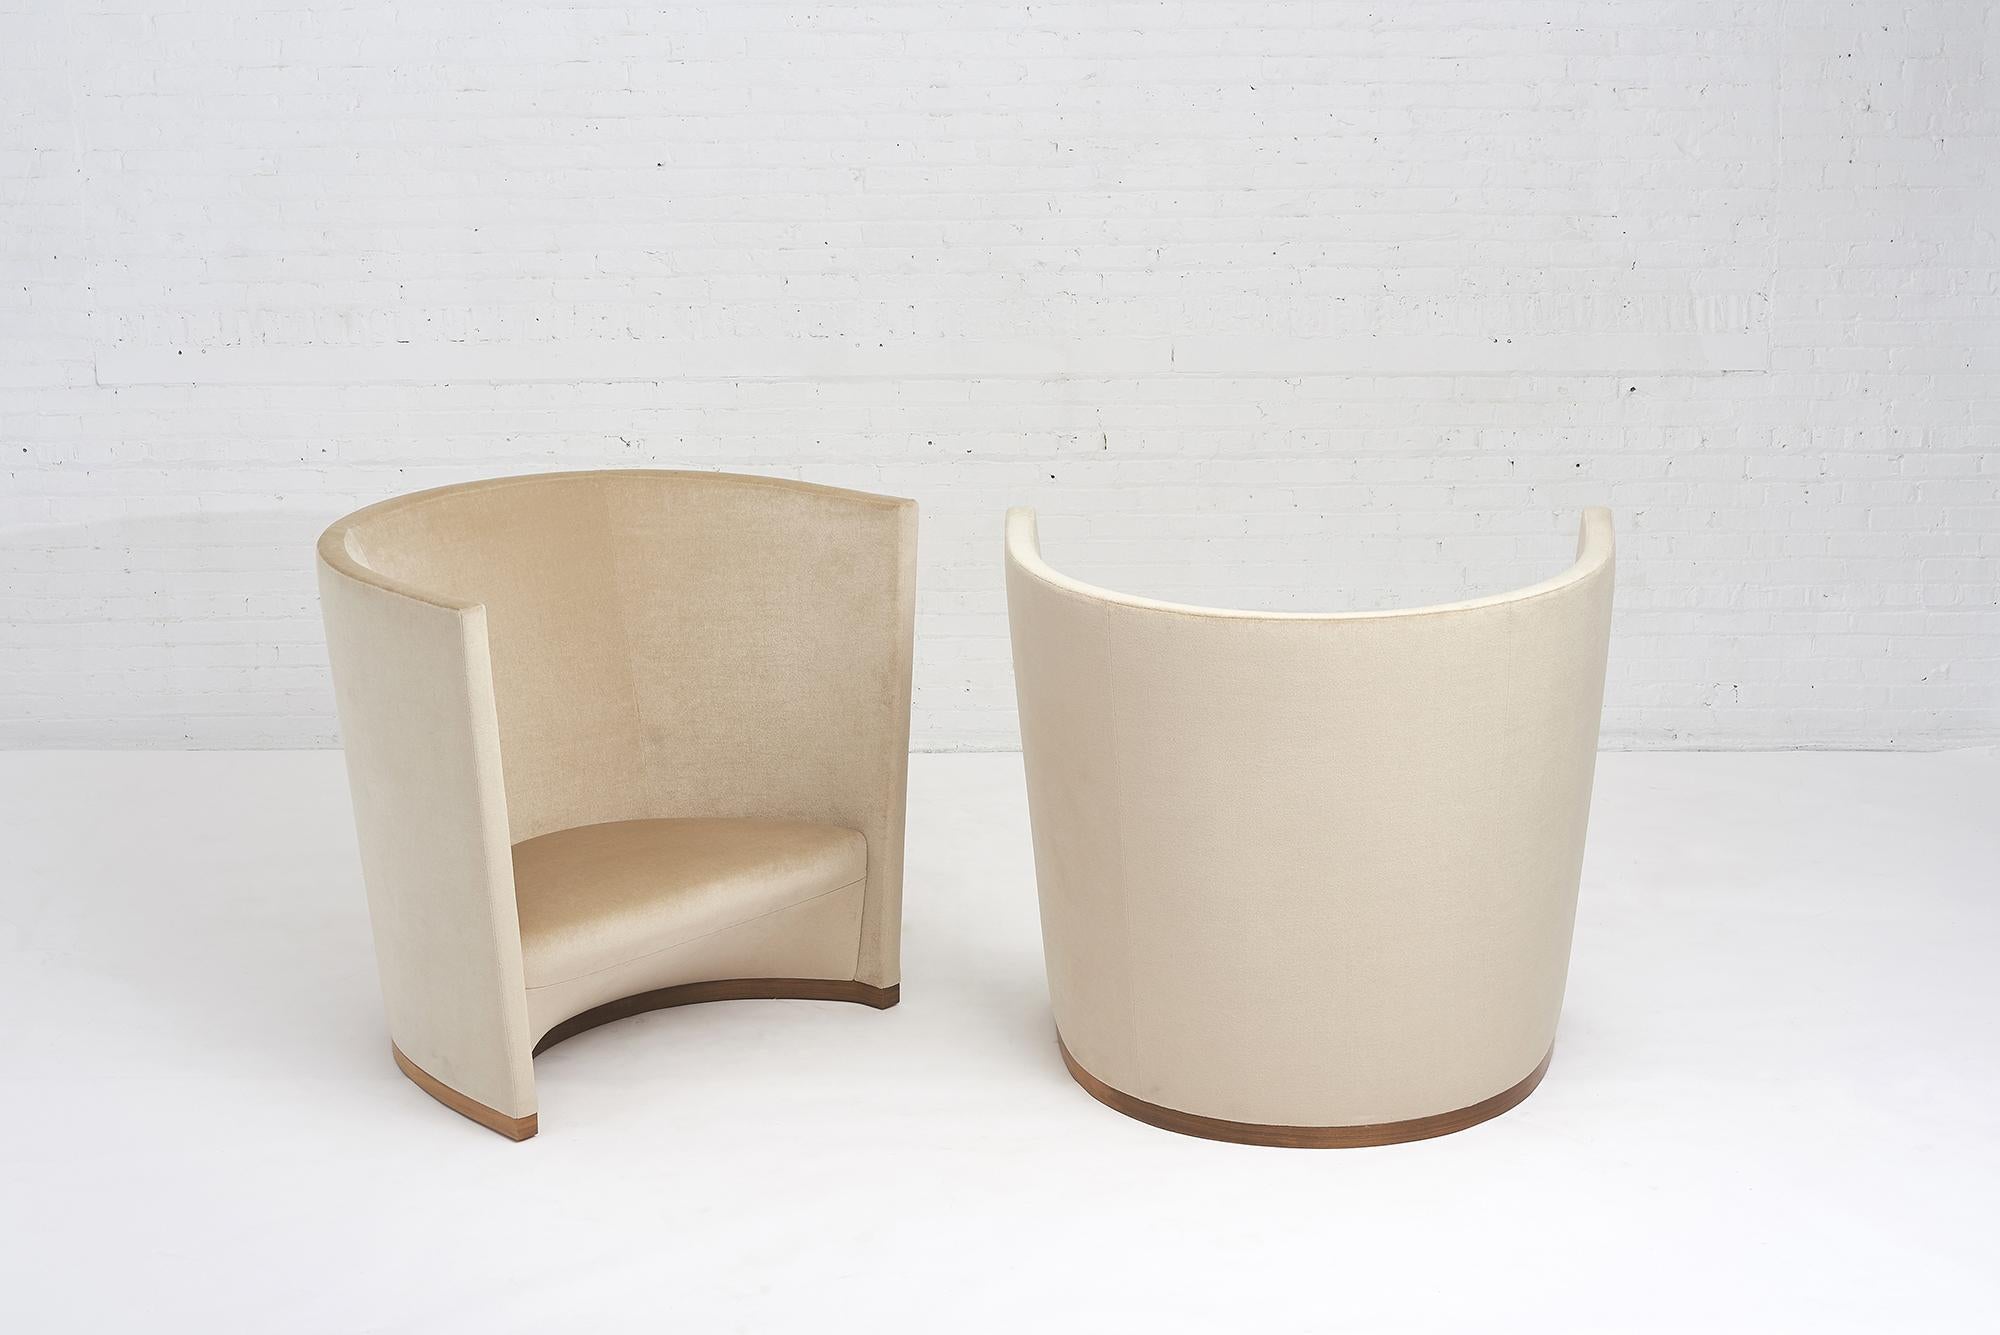 20th Century Triumph Chairs by Christopher Pillet for Holly Hunt